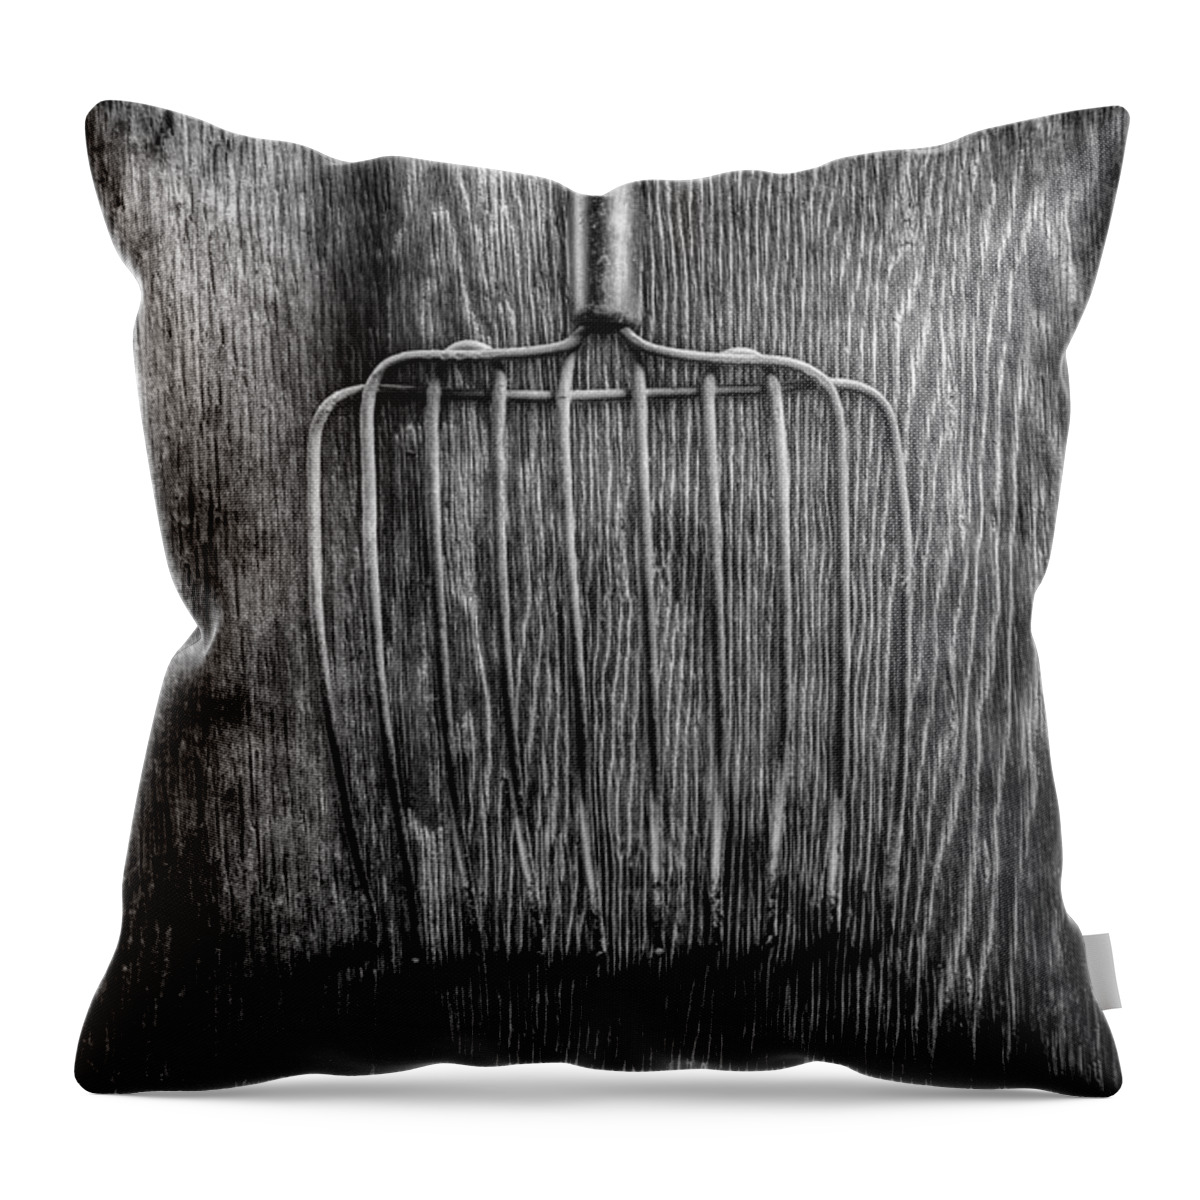 Background Throw Pillow featuring the photograph Ensilage Fork Down by YoPedro